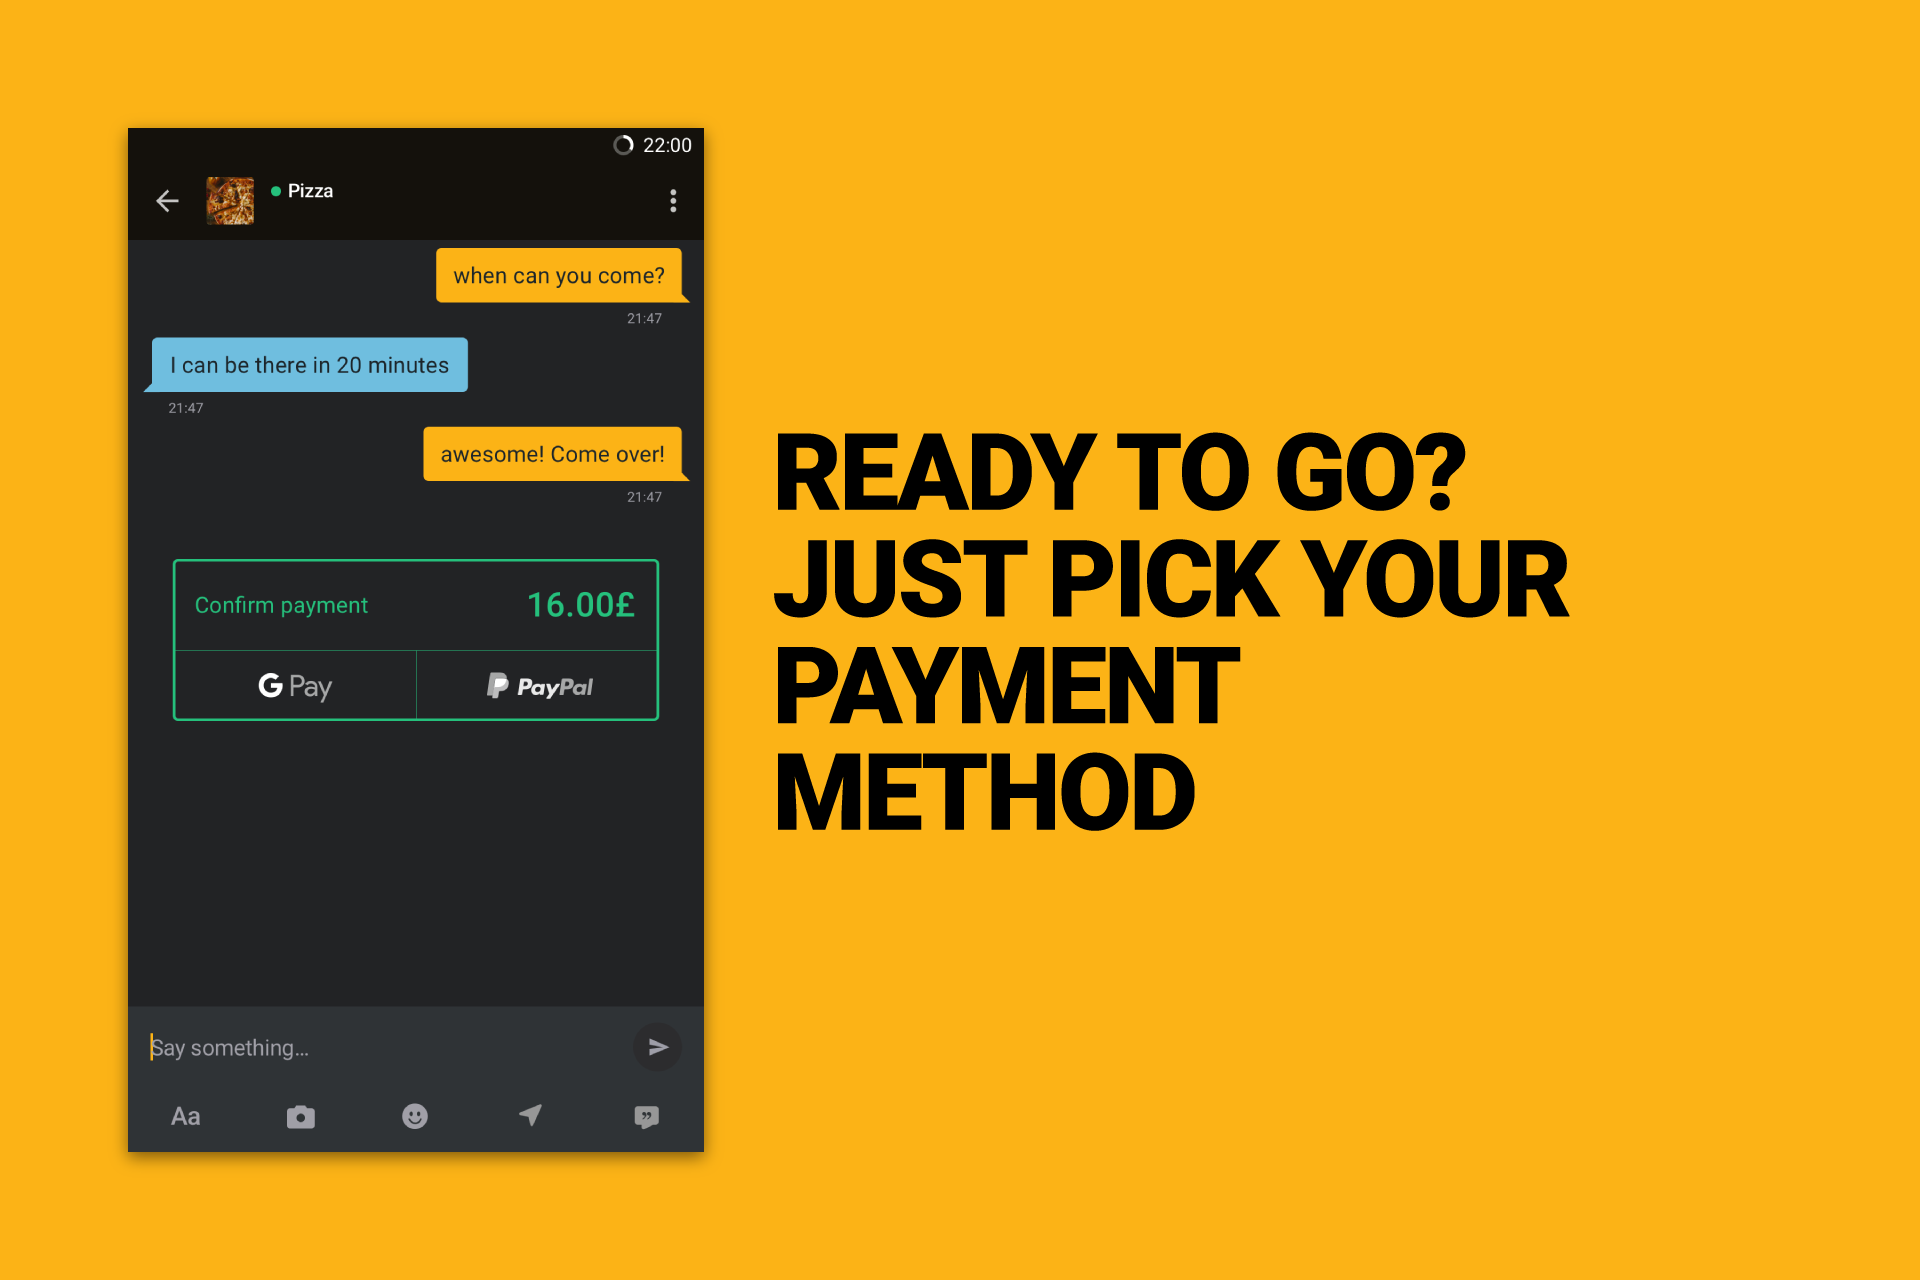 Confirm payment method to purchase